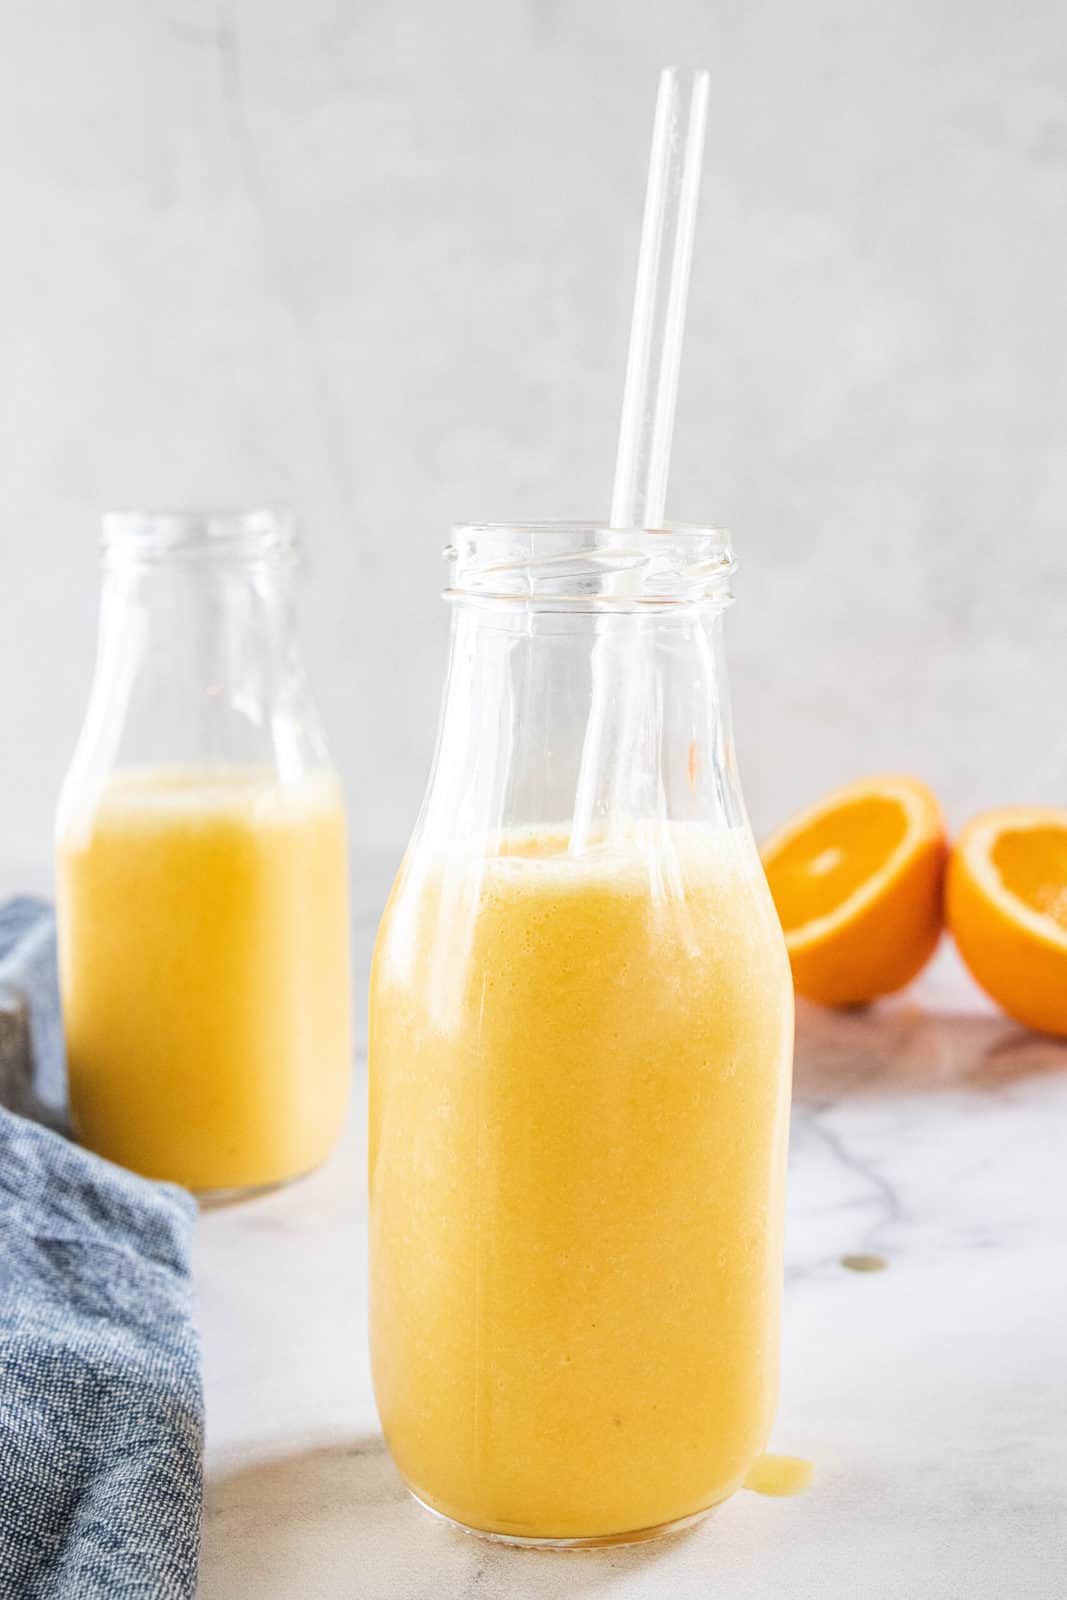 Two jars filled with an orange smoothie with orange halves and a dish towel next to the jars all on top of a granite countertop.